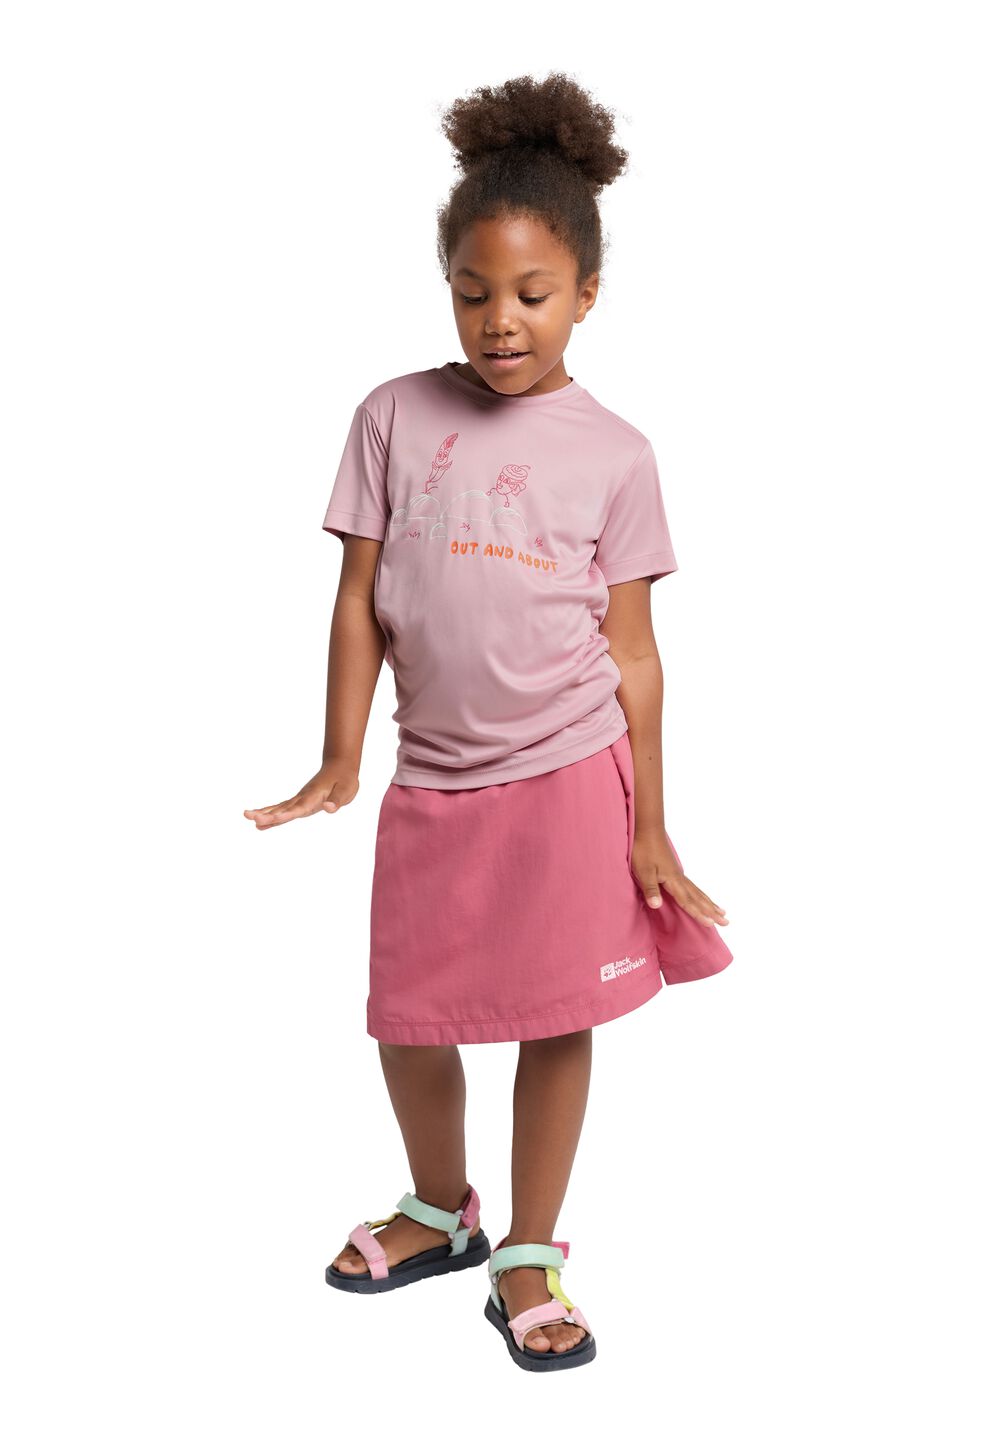 Jack Wolfskin OUT AND About T-Shirt Kids Functioneel shirt Kinderen 92 water lily water lily